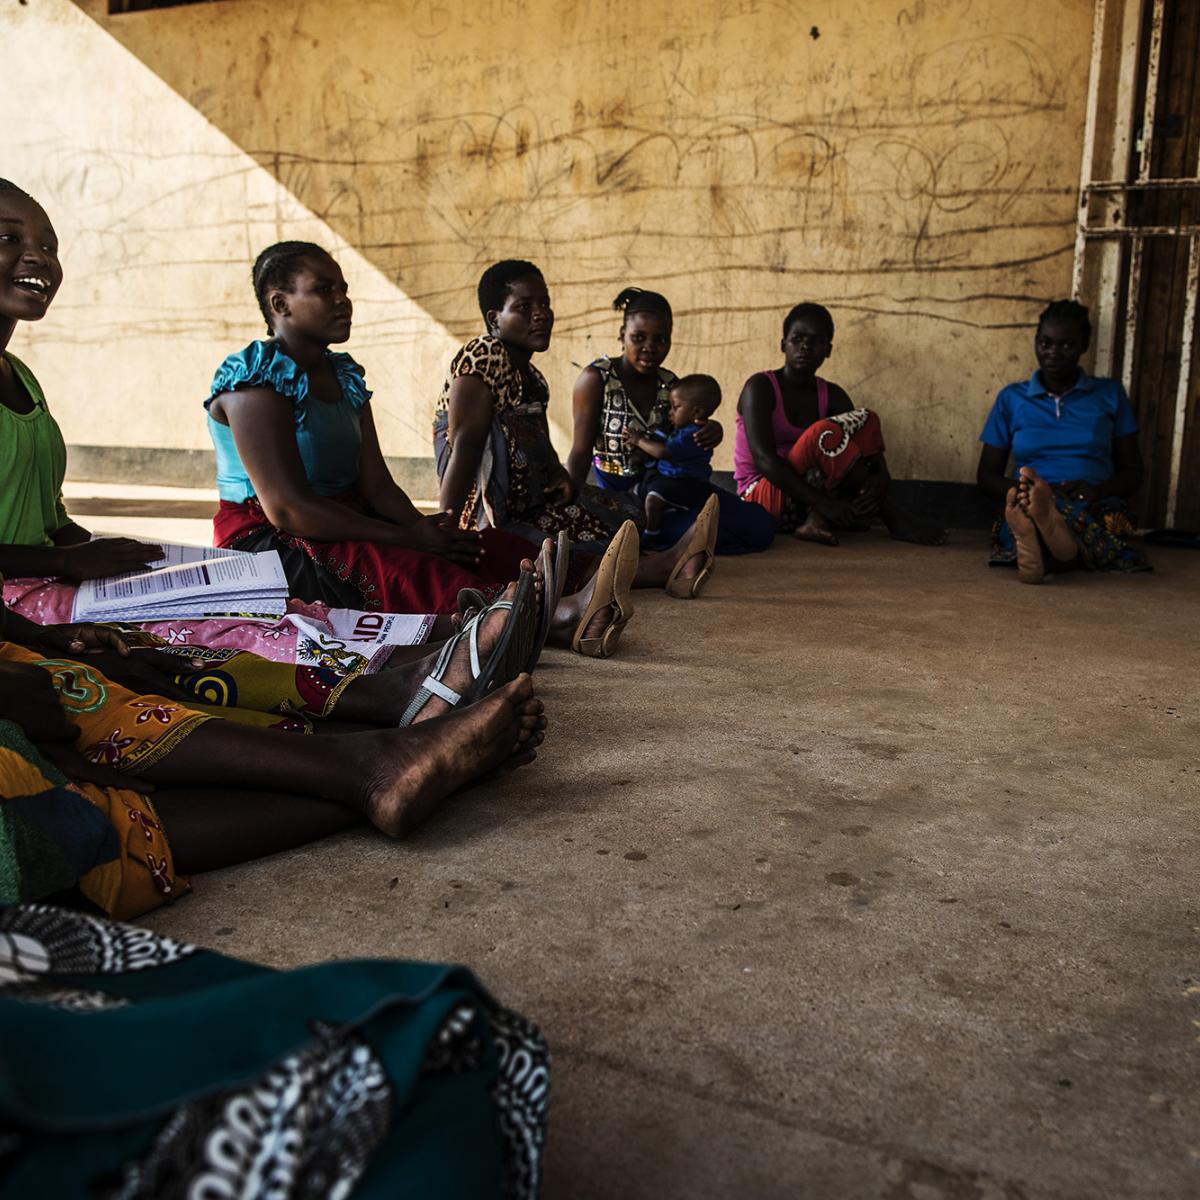 A group of Malawian women sit in a circle in a building courtyard.